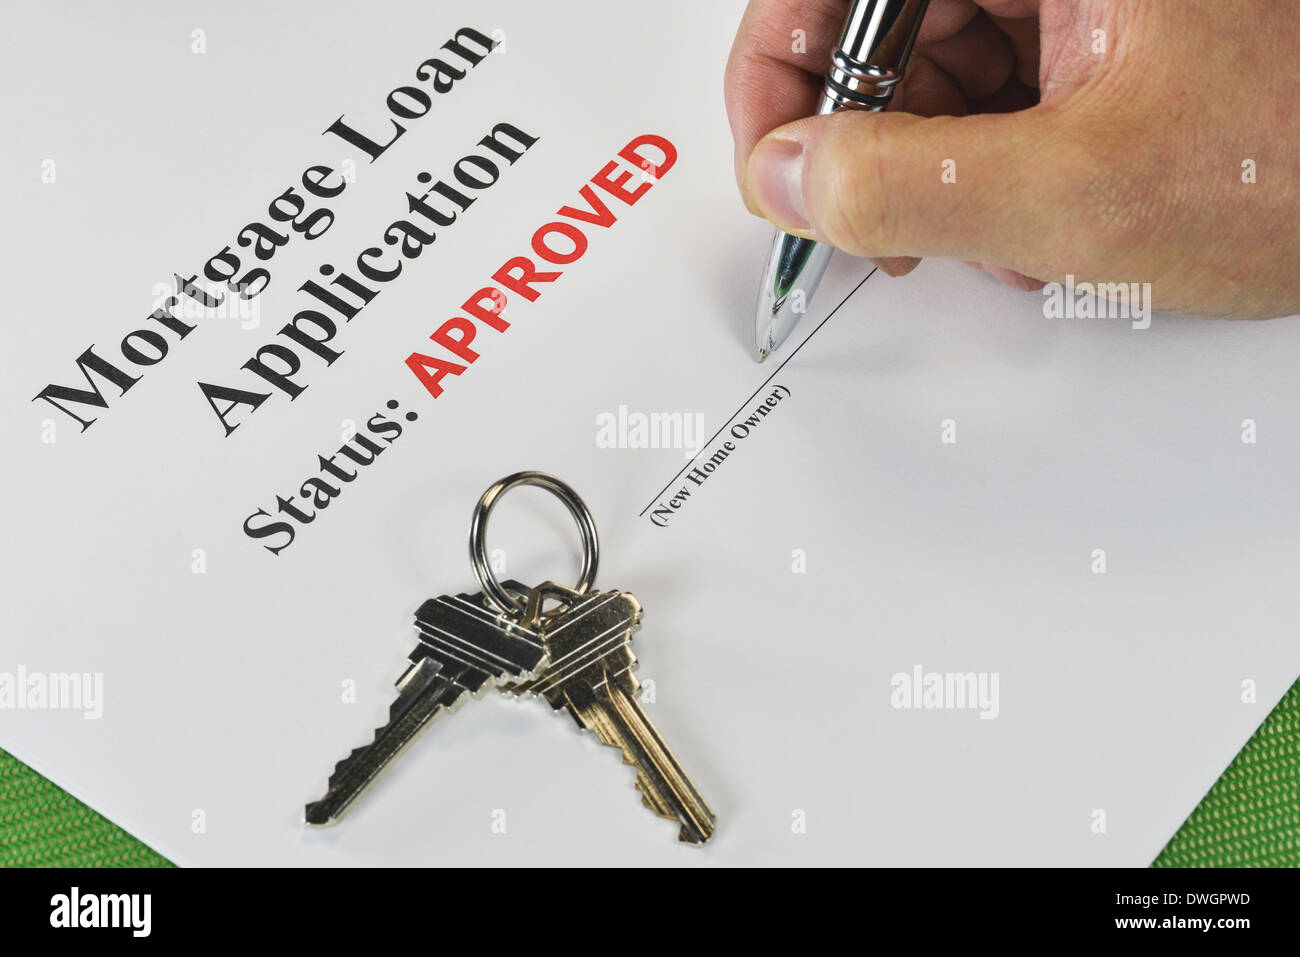 Hand Signing An Approved Real Estate Mortgage Loan Document With House Keys Stock Photo